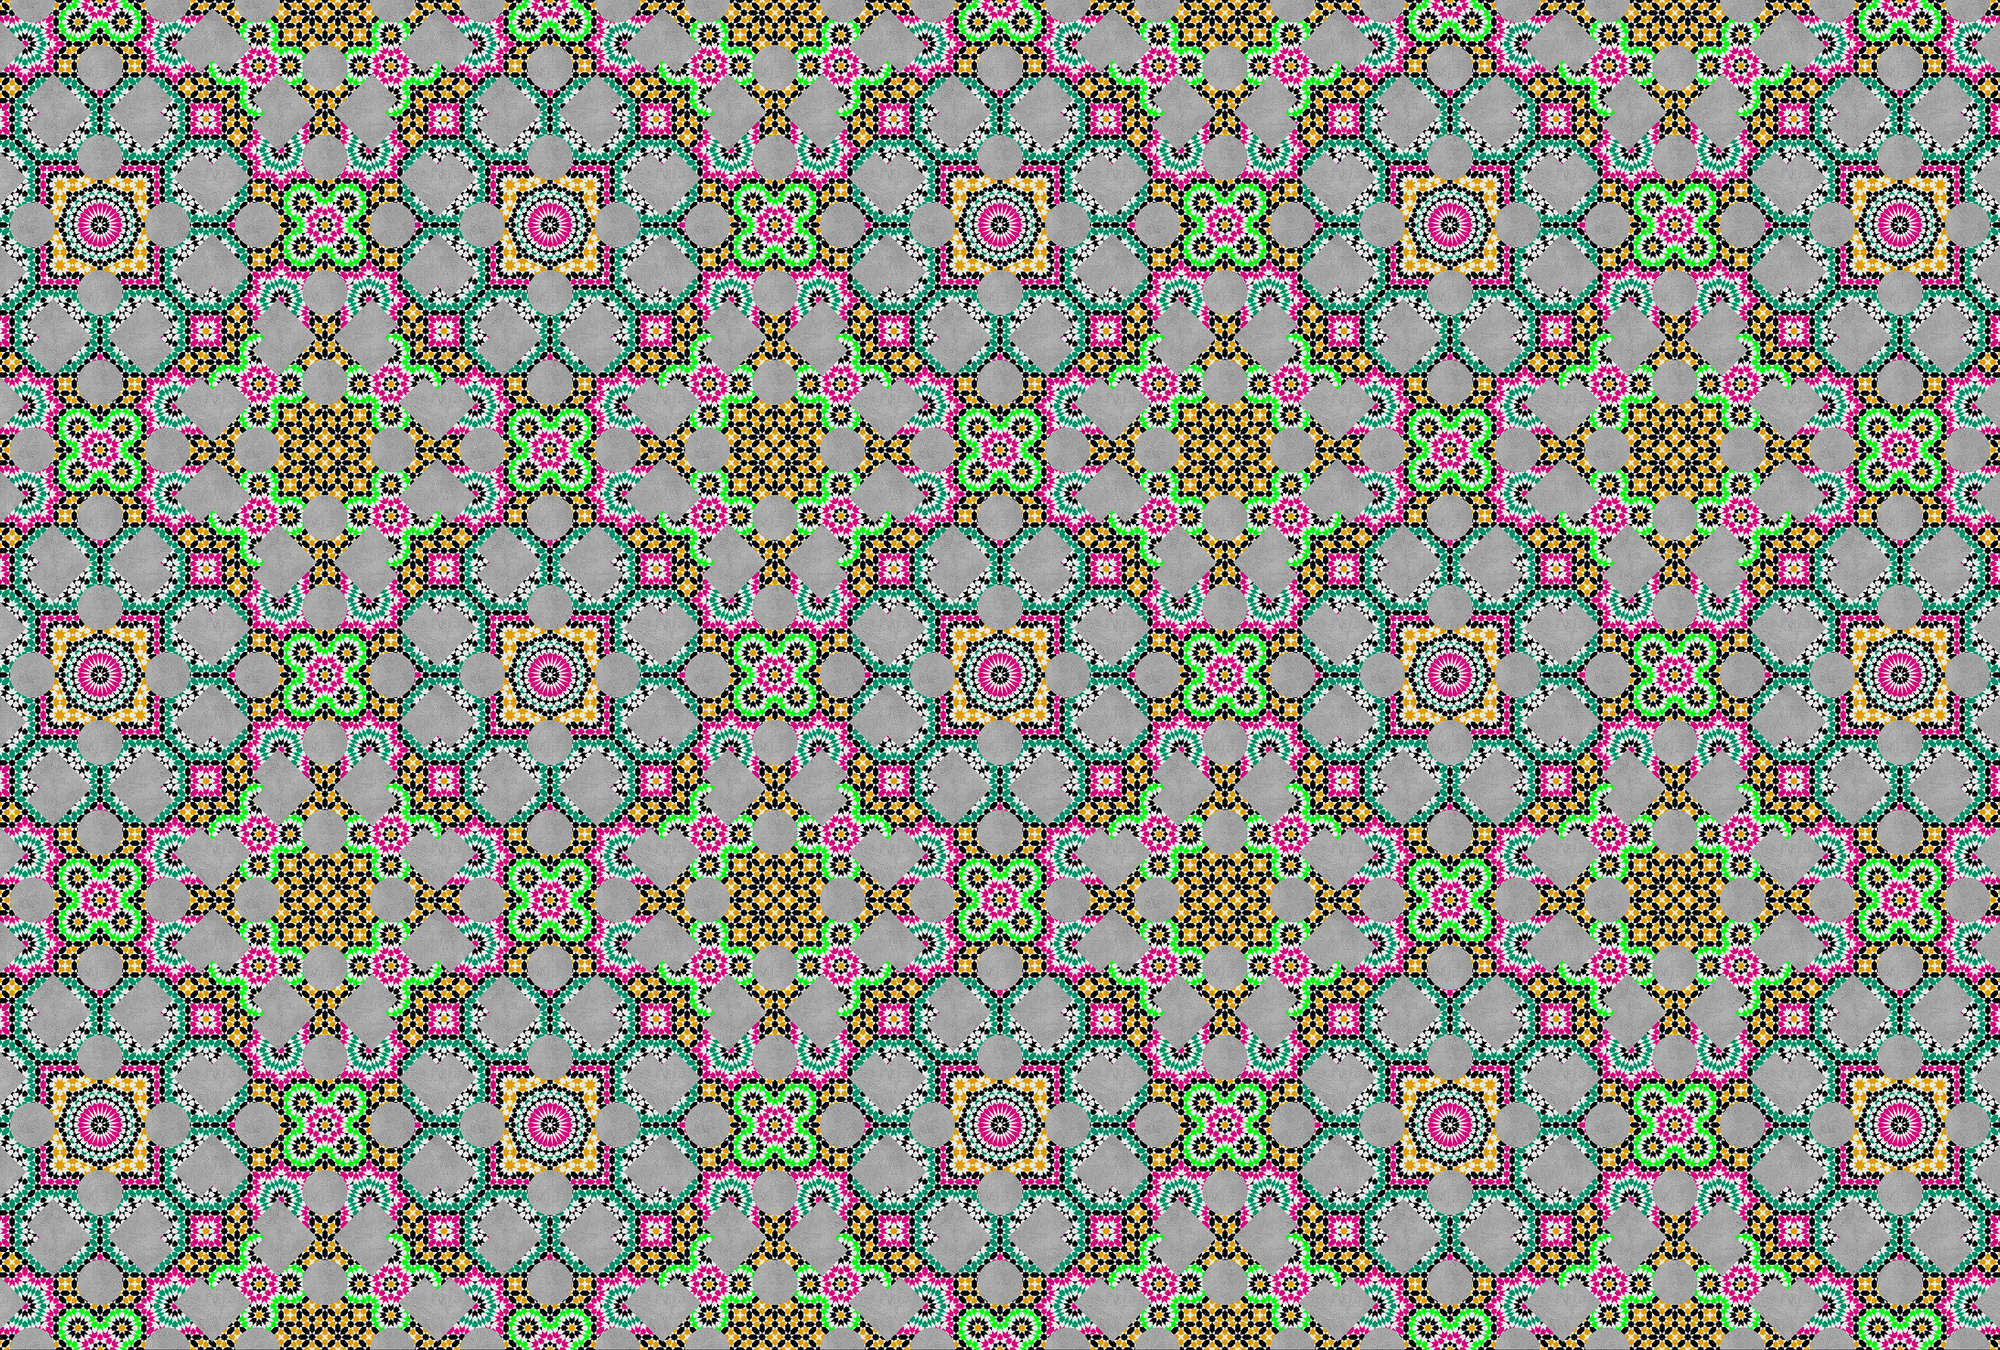             Colorful photo wallpaper with kaleidoscope effect - grey, pink
        